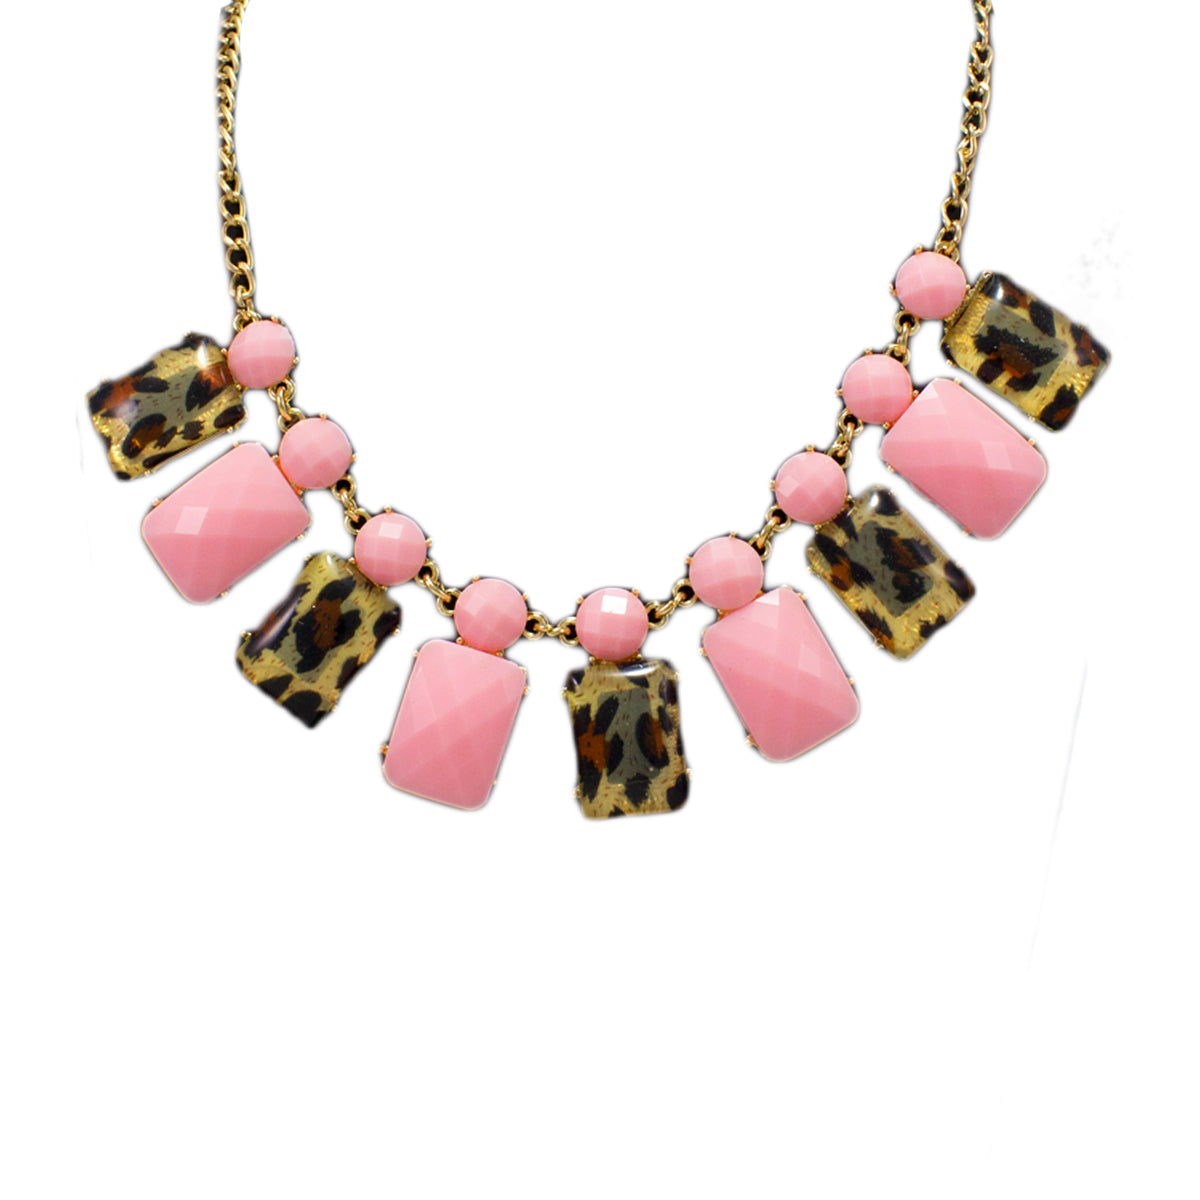 Abhinn Stylish Designer Pink Necklace with Animal Printed Stones For Women